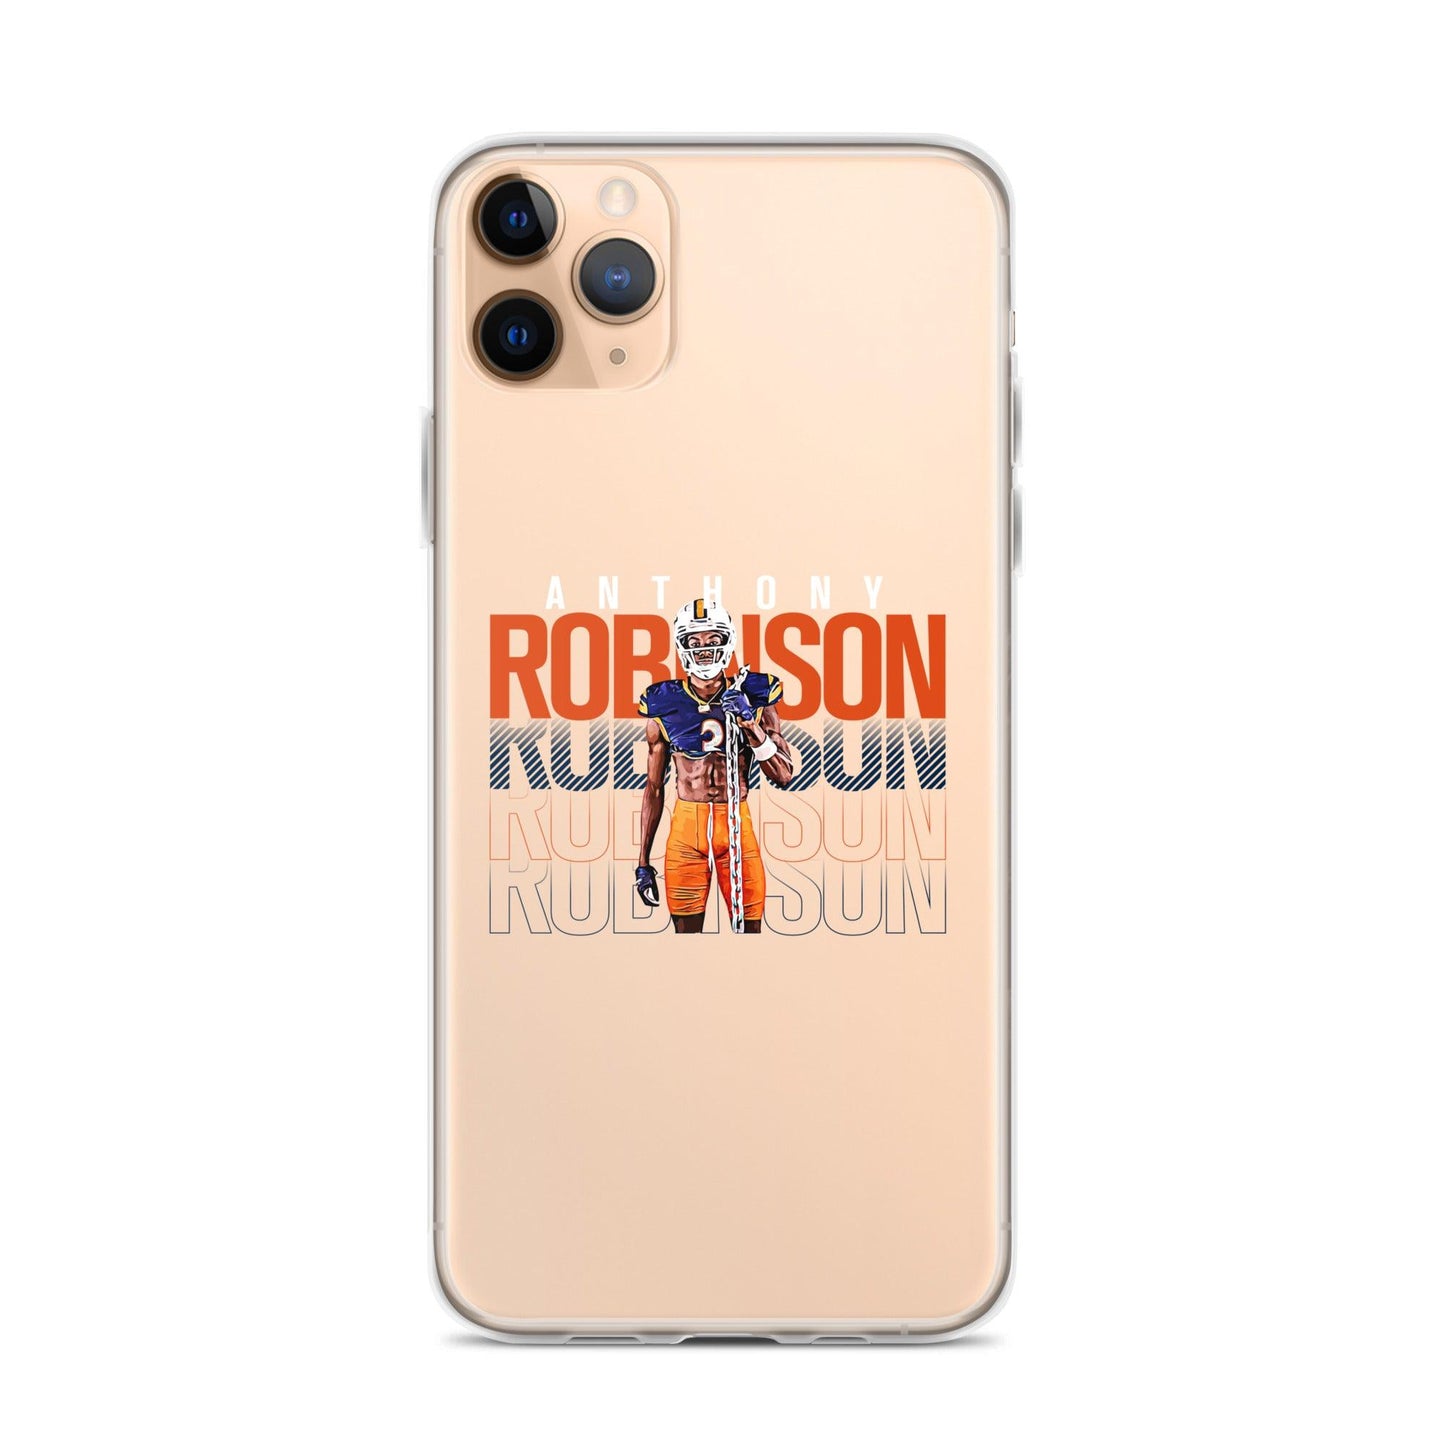 Anthony Robinson "Gameday" iPhone Case - Fan Arch